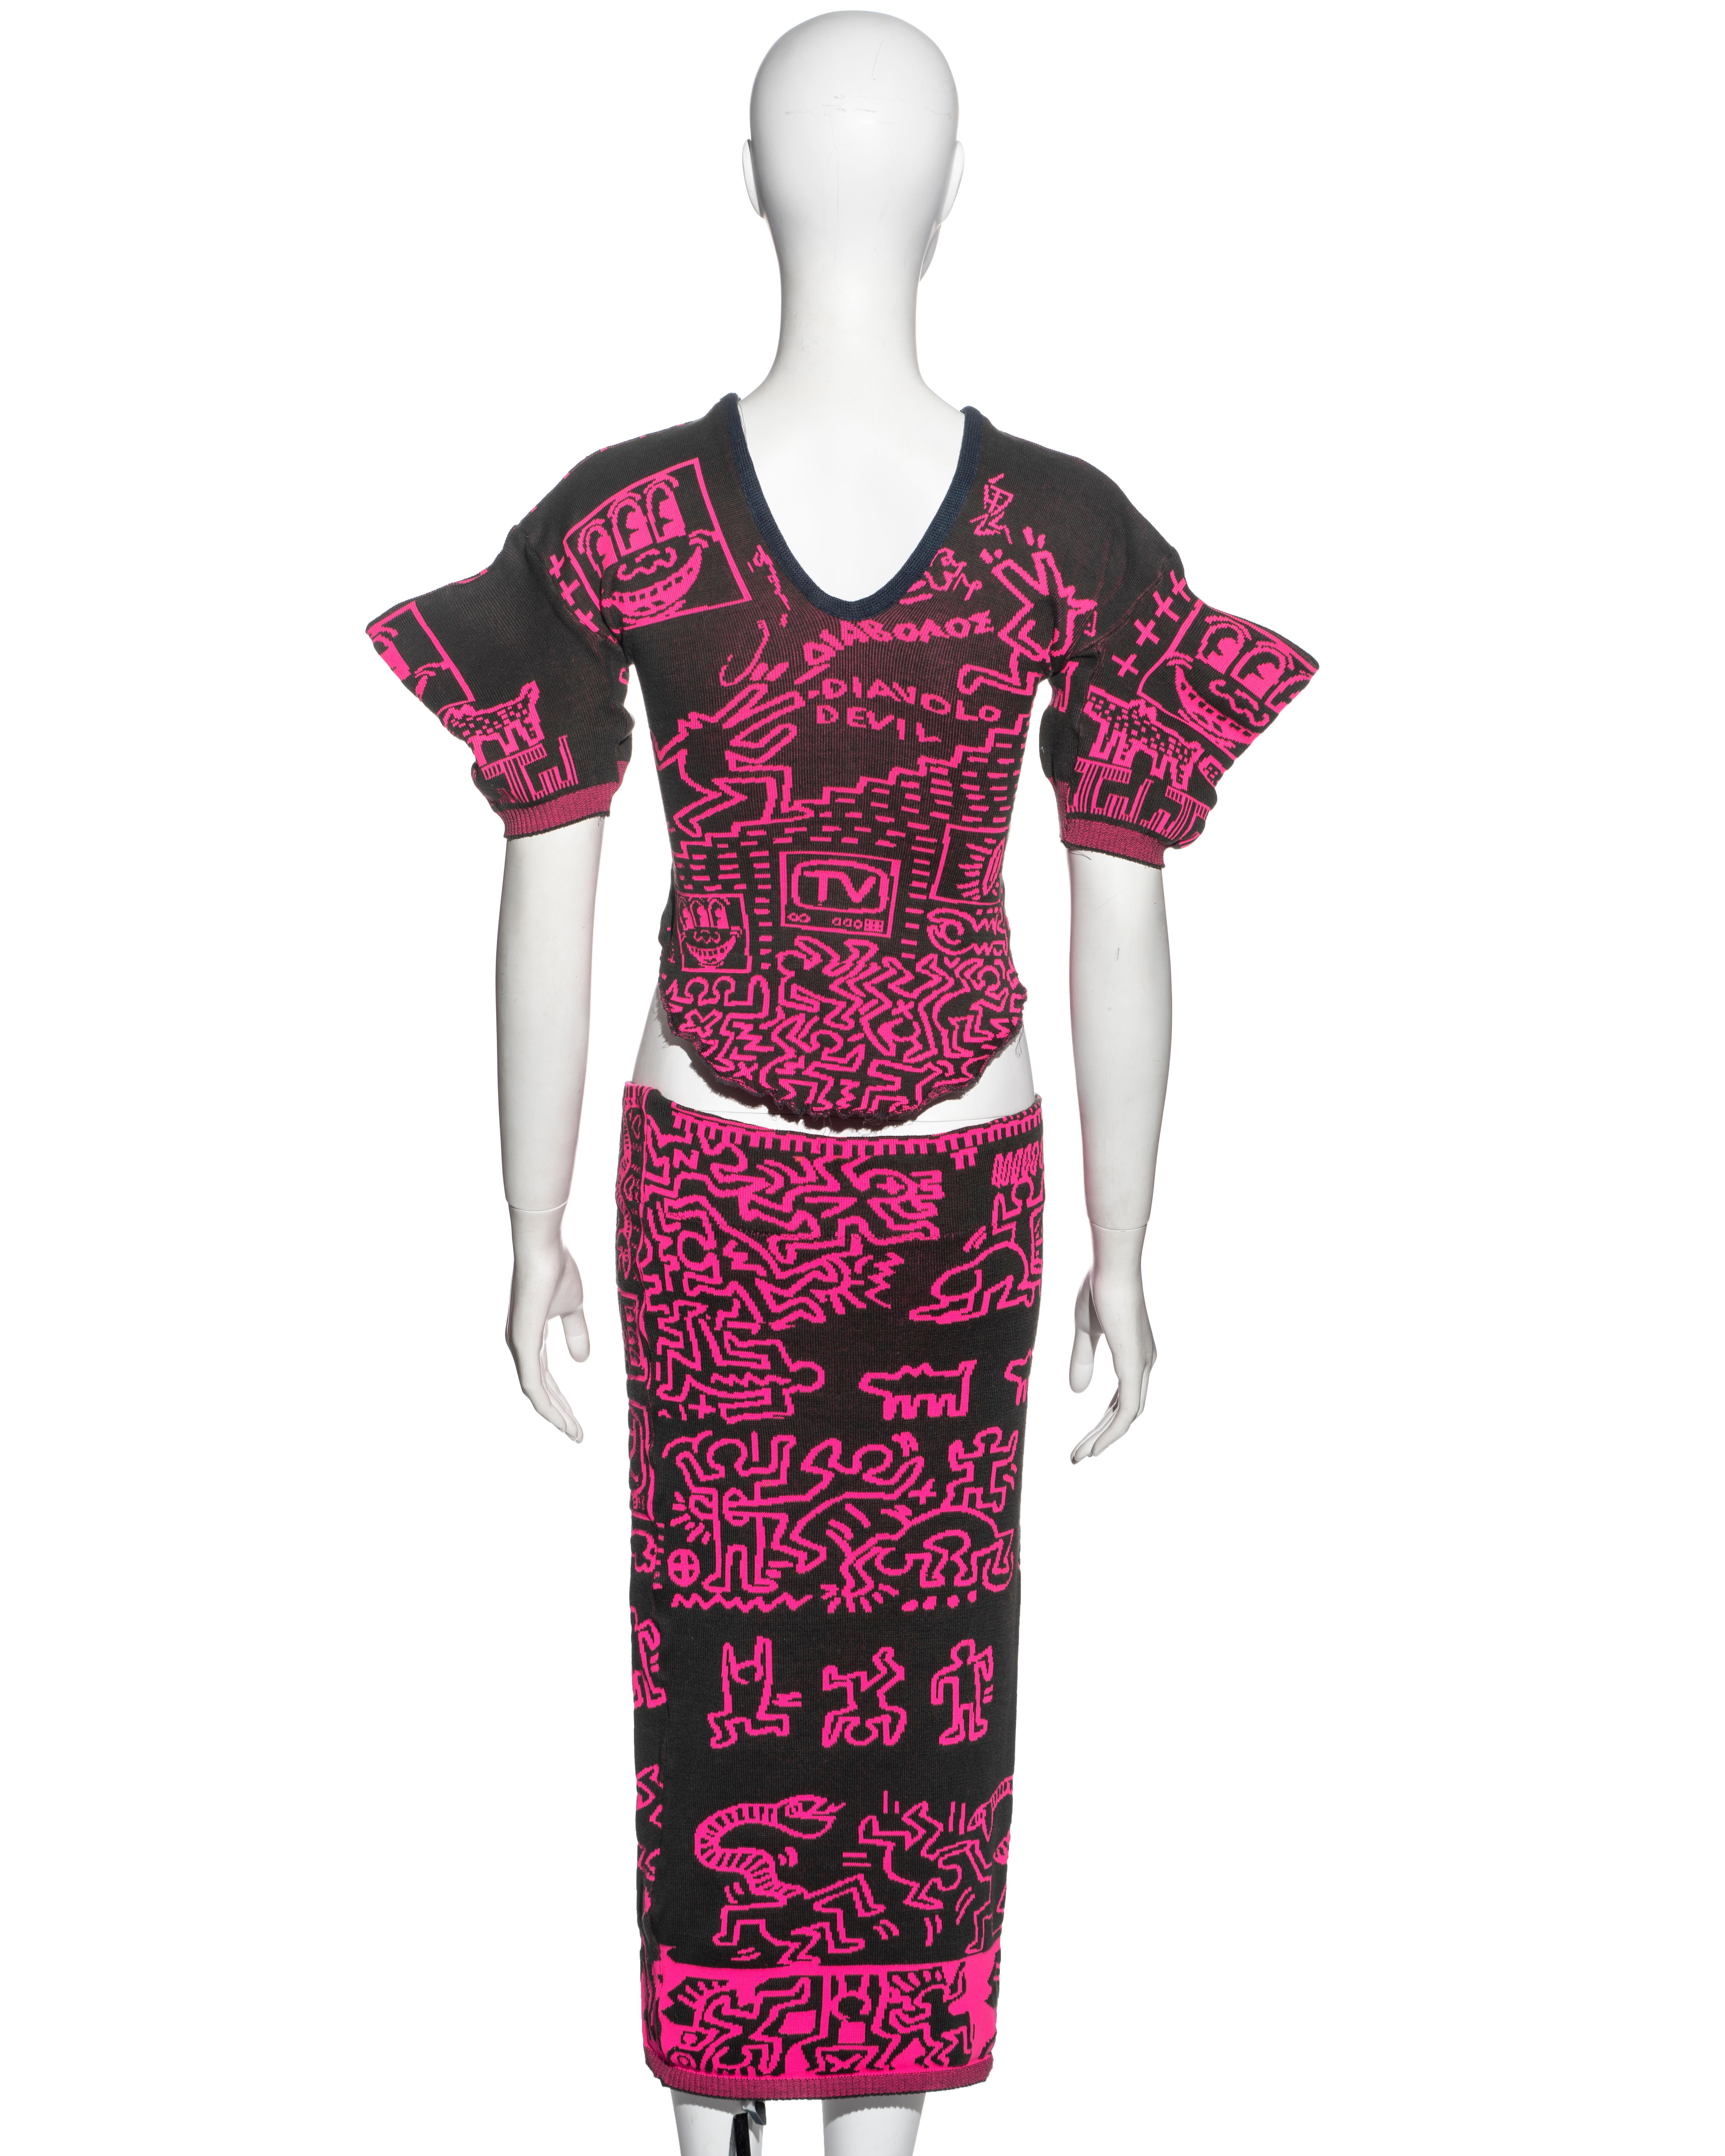 Women's Vivienne Westwood x Malcolm McLaren x Keith Haring 'Witches' skirt suit, fw 1983 For Sale